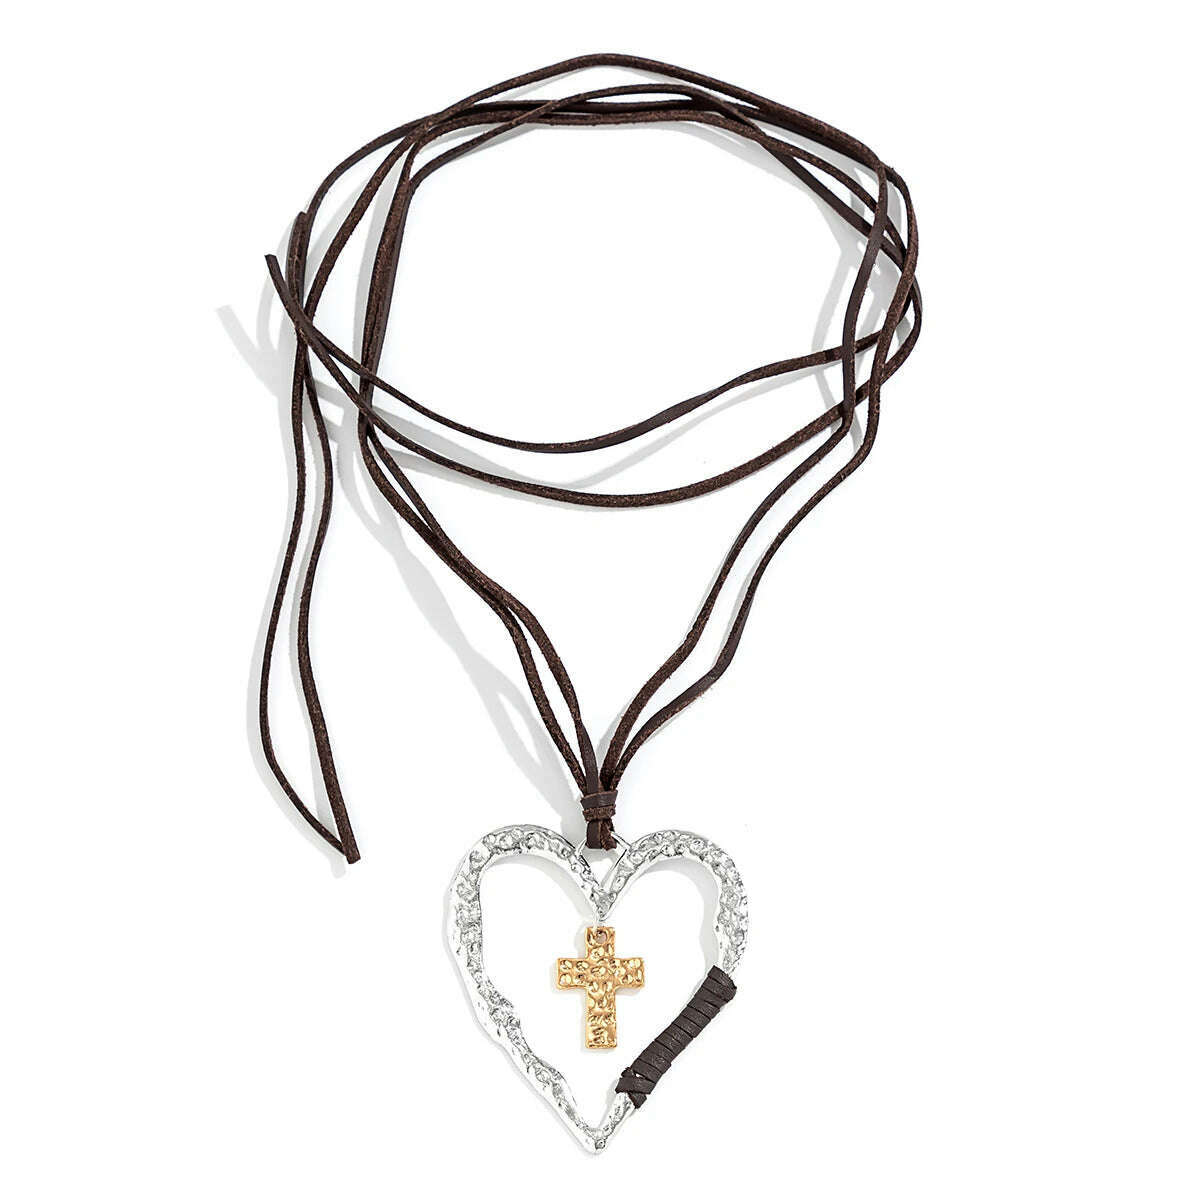 KIMLUD, Exaggerated Ethnic Big Hollow Love Heart Cross Jesus Pendant Choker Necklace for Women Goth Adjustable Rope Chain Y2K Jewelry, KIMLUD Womens Clothes